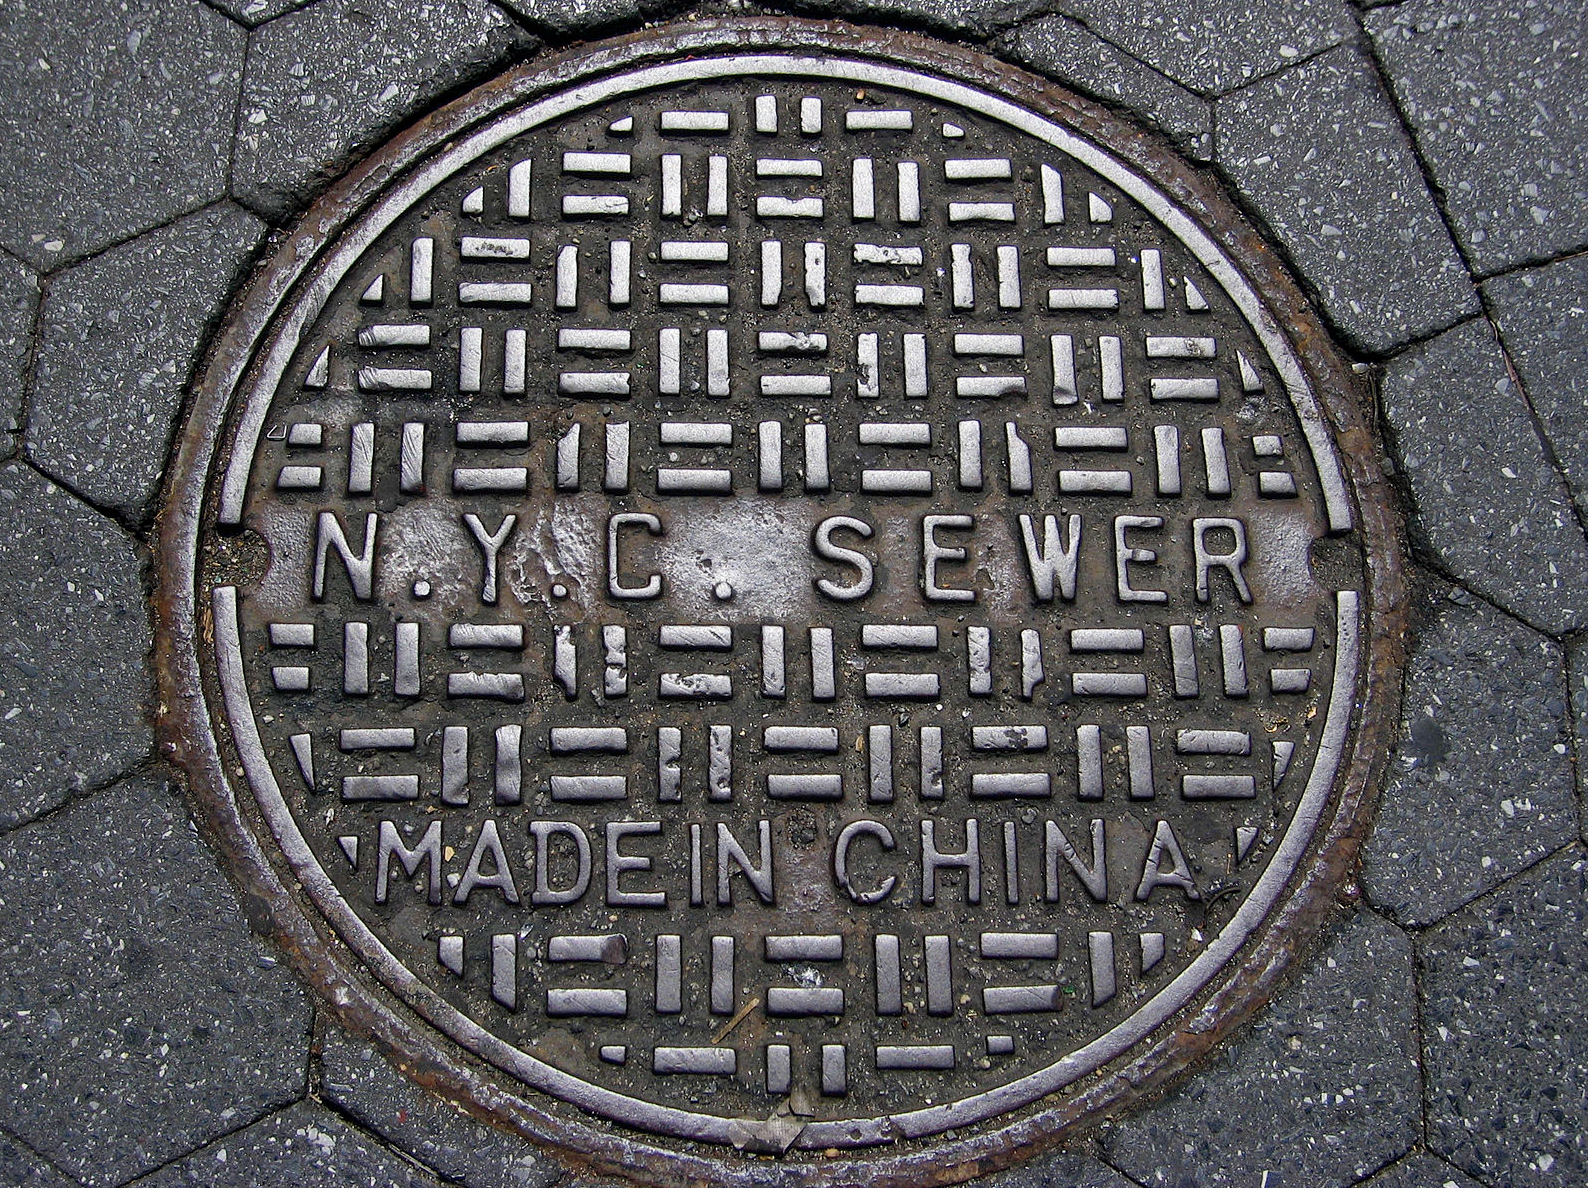 NYC sewer manhole cover